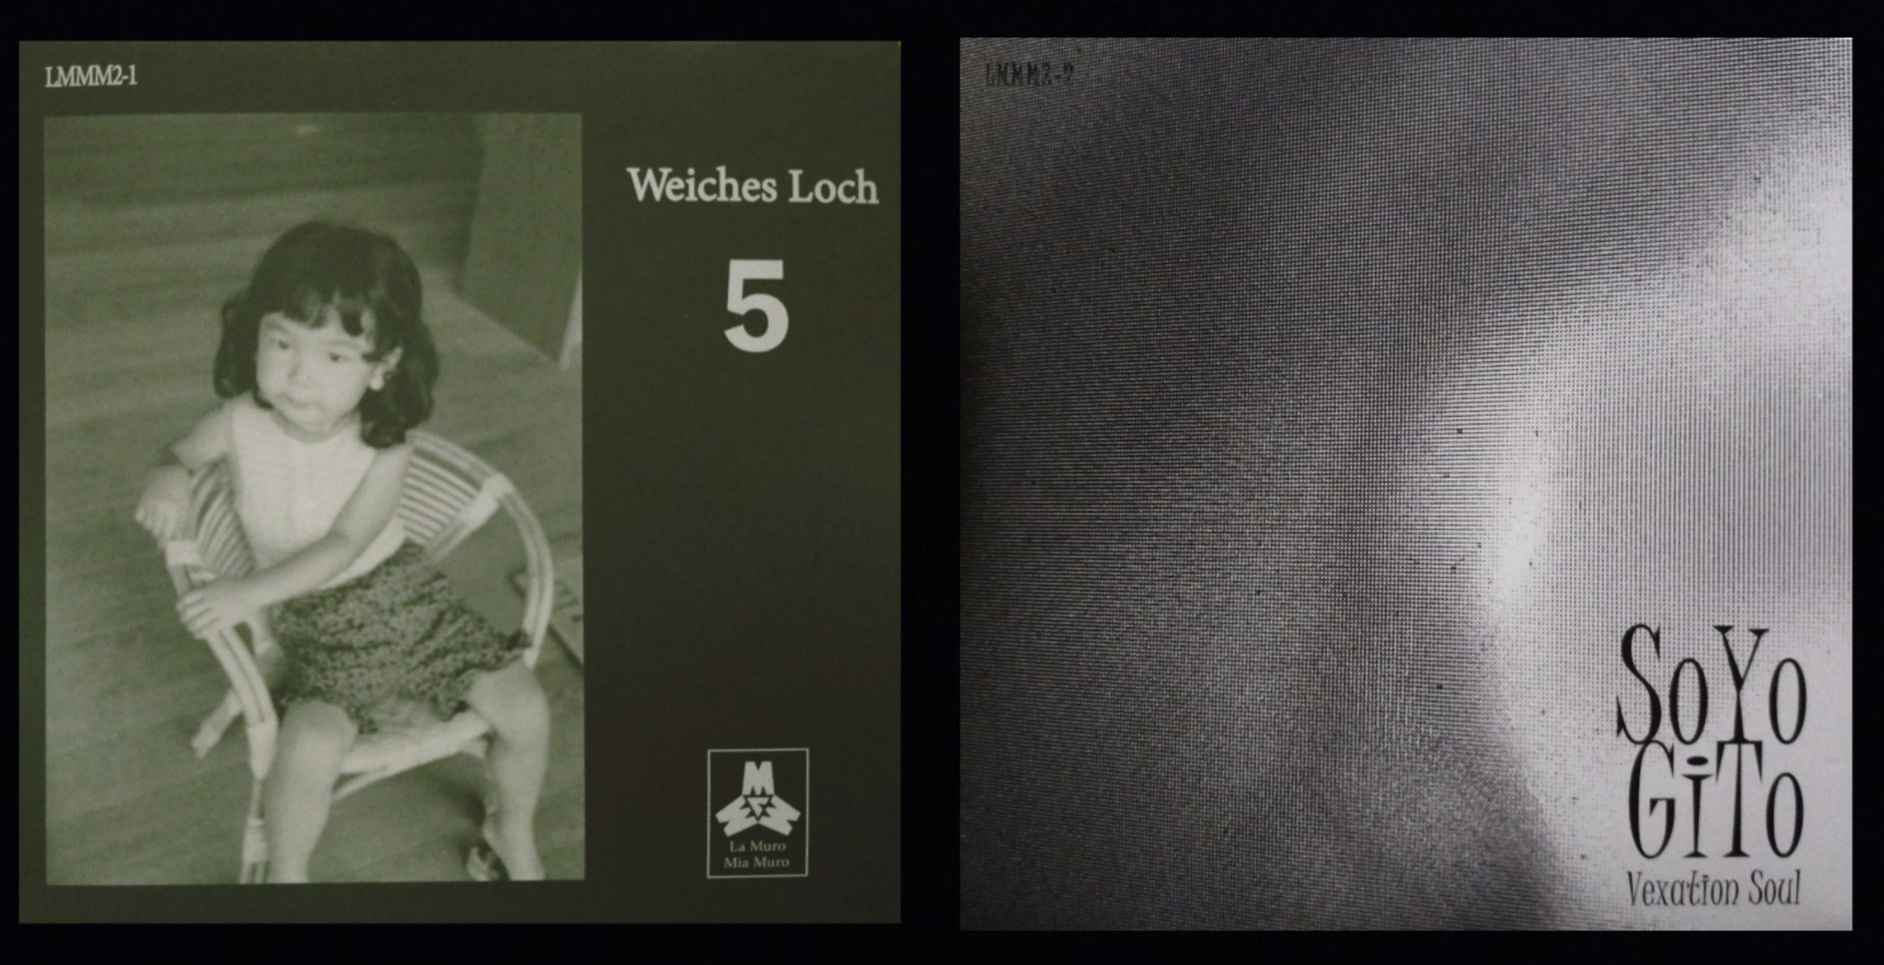 WEICHES LOCH / VEAXATION SOUL : 5 / SOYOGITO